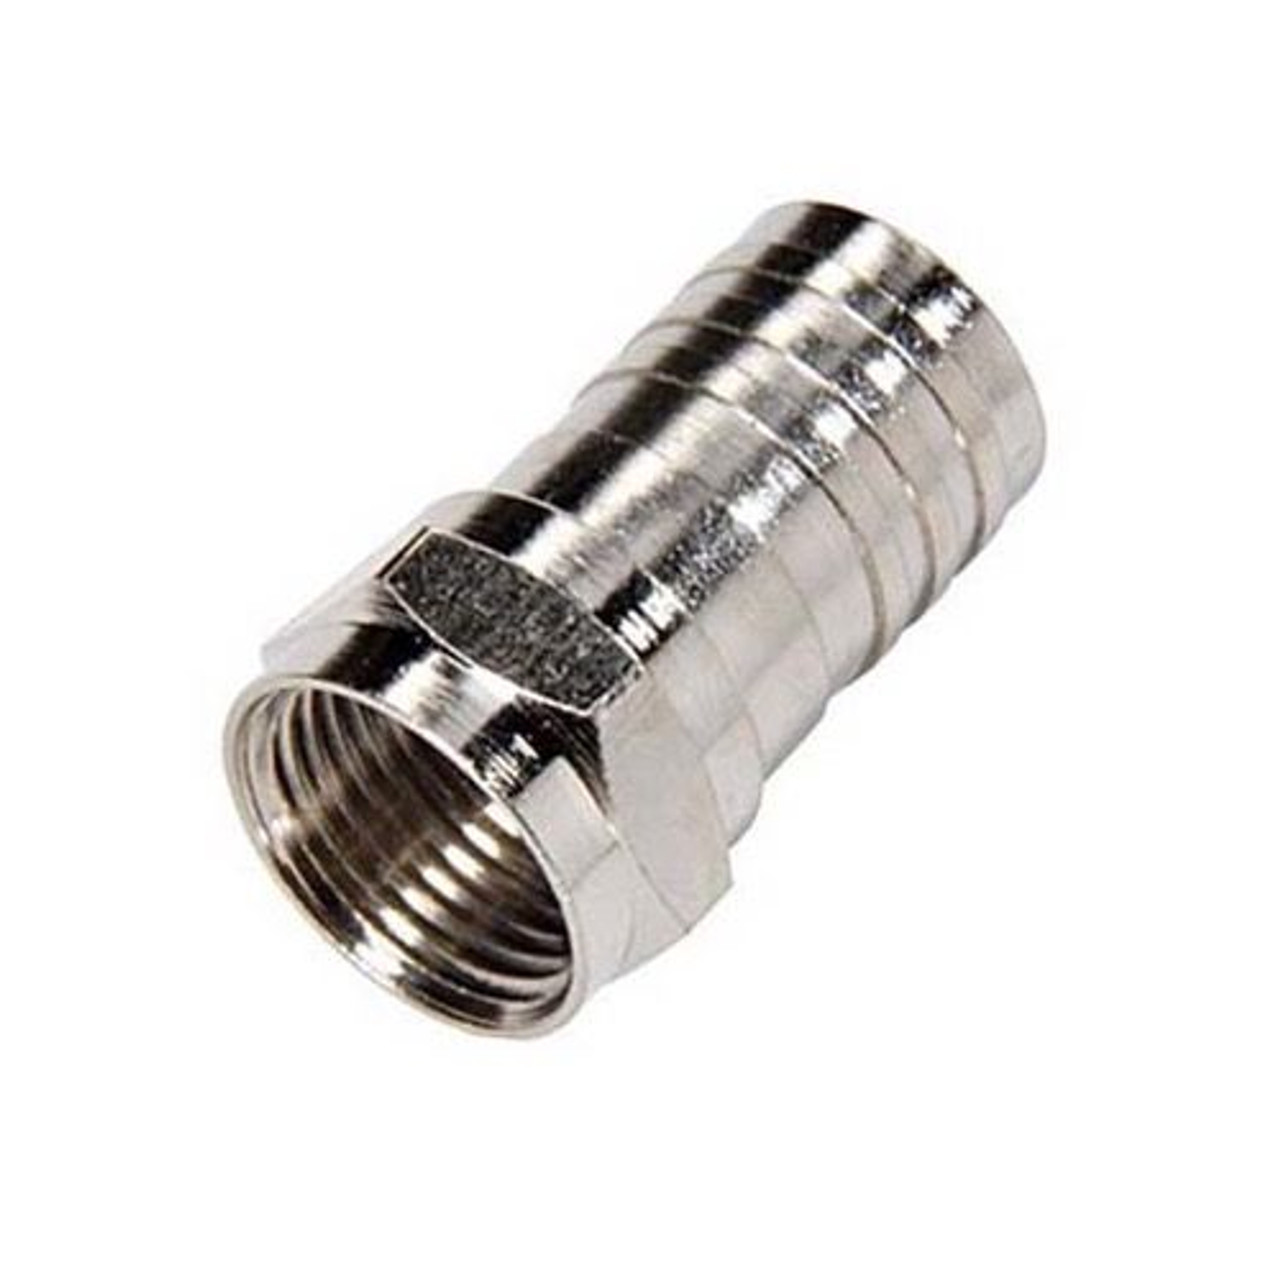 Steren 200-025 RG6 F Crimp Connector Coaxial Cable Connector 1 Pack Single RG-6 Coax Cable Hex Crimp End Connector with Attached Crimp Ring, Part # 200025